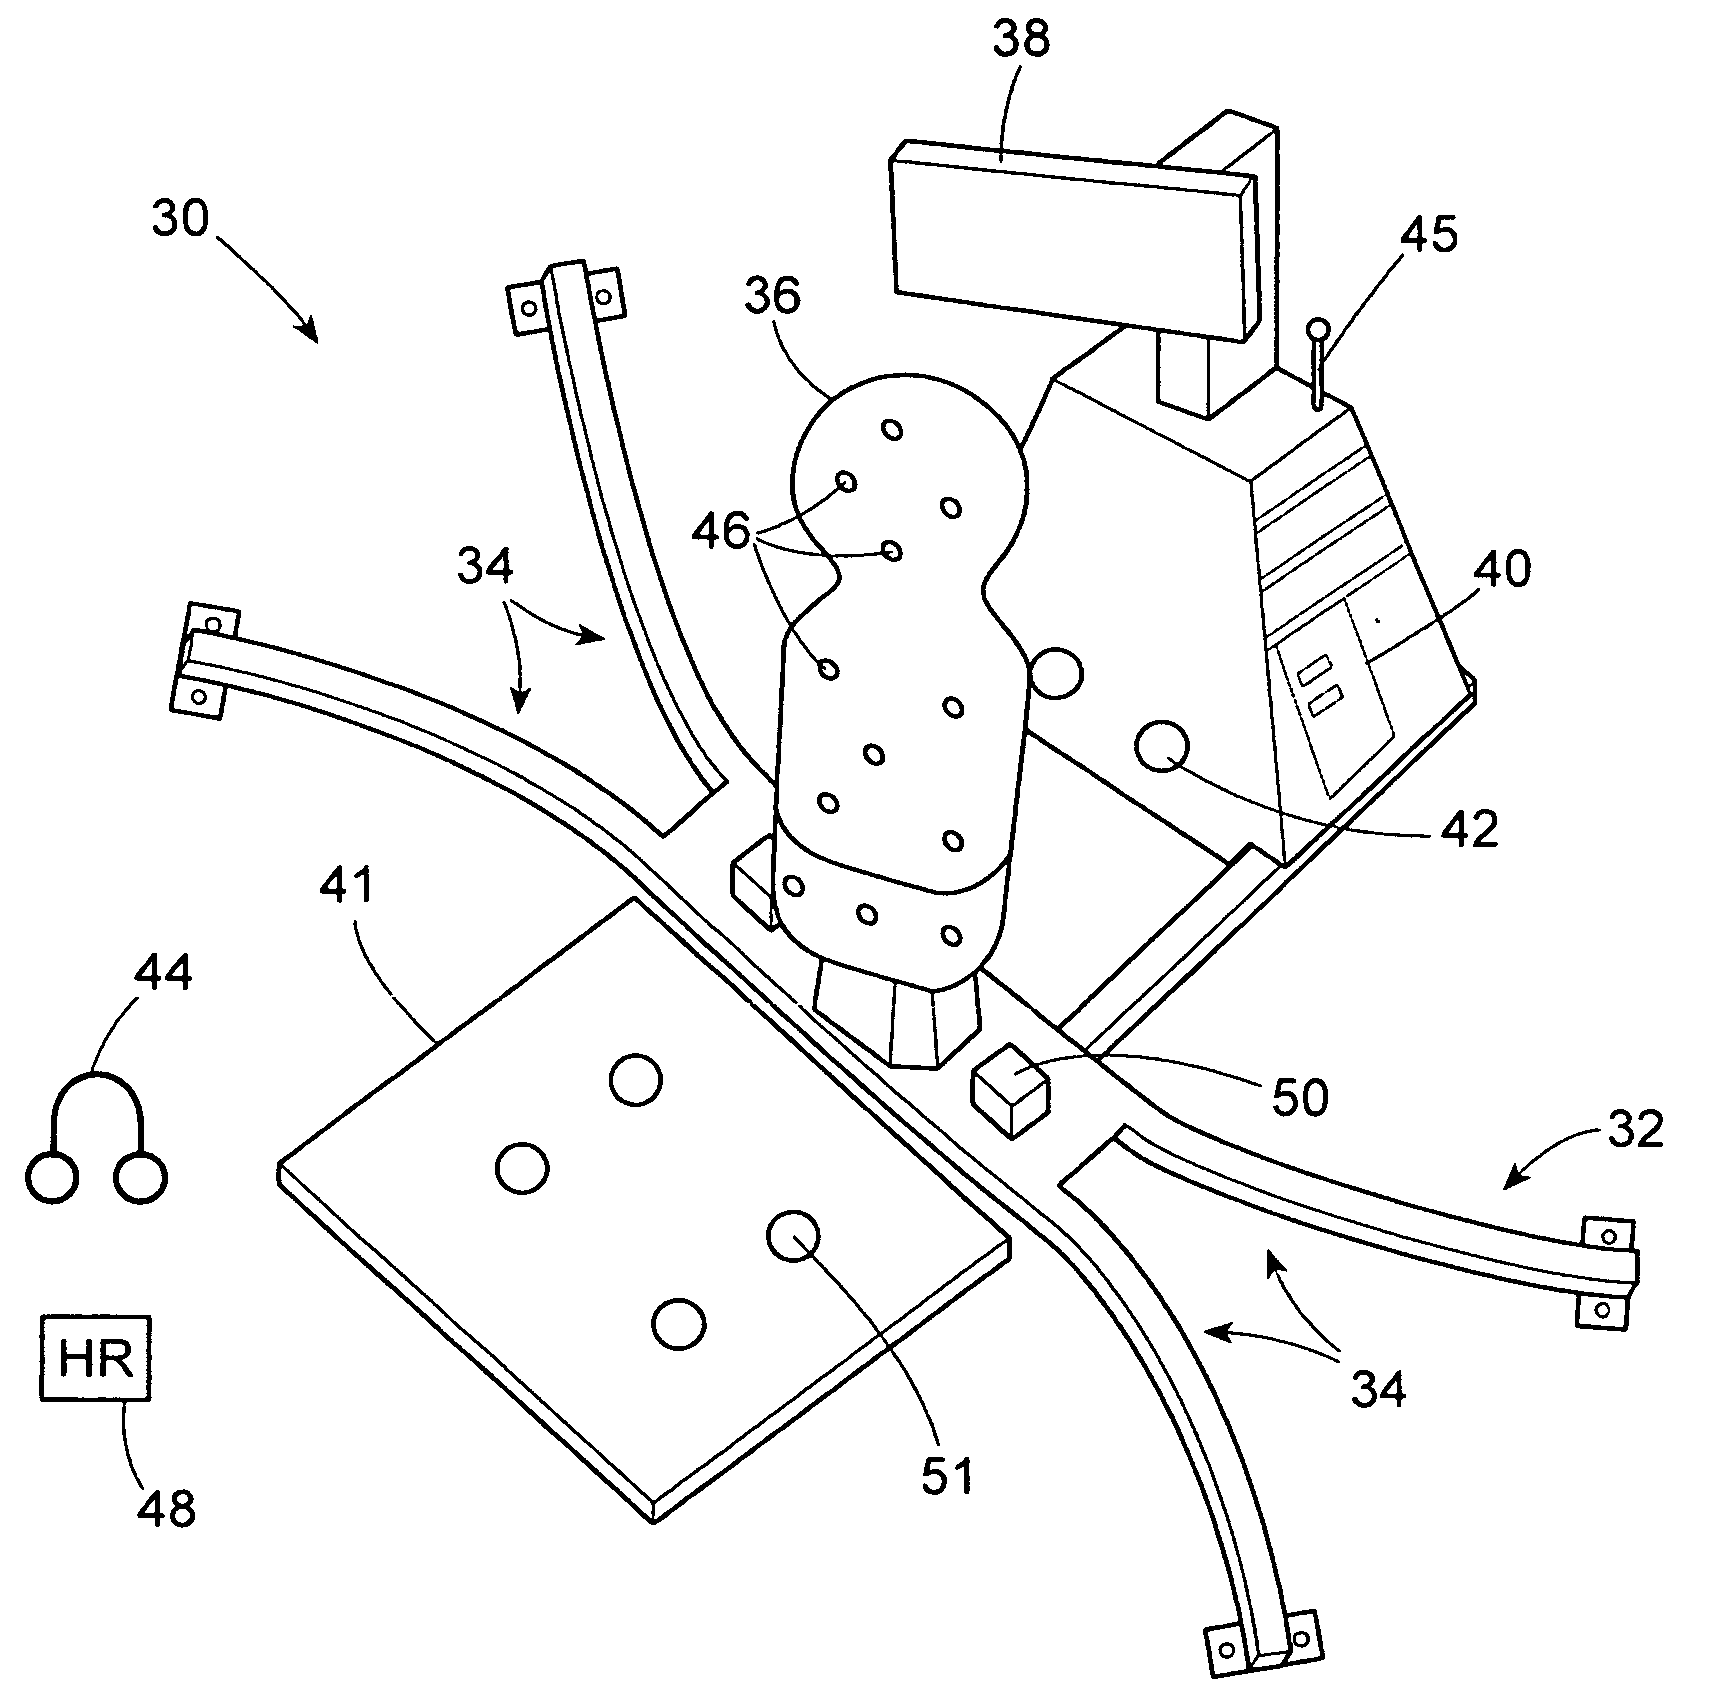 Method for providing a feedback-controlled exercise routine